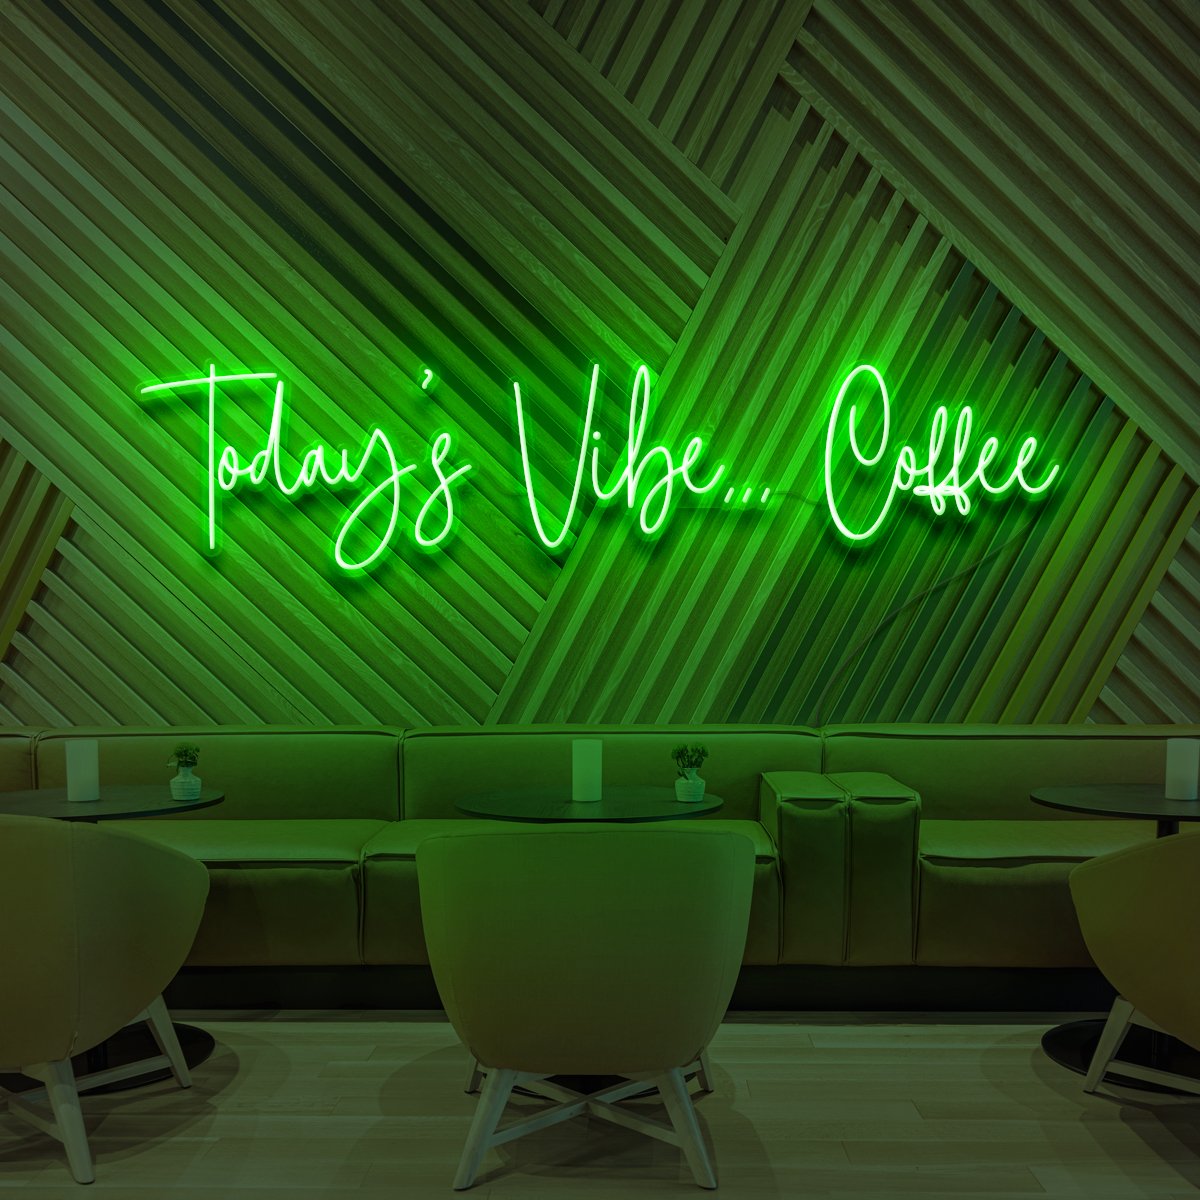 "Today's Vibe... Coffee" Neon Sign for Cafés 90cm (3ft) / Green / LED Neon by Neon Icons